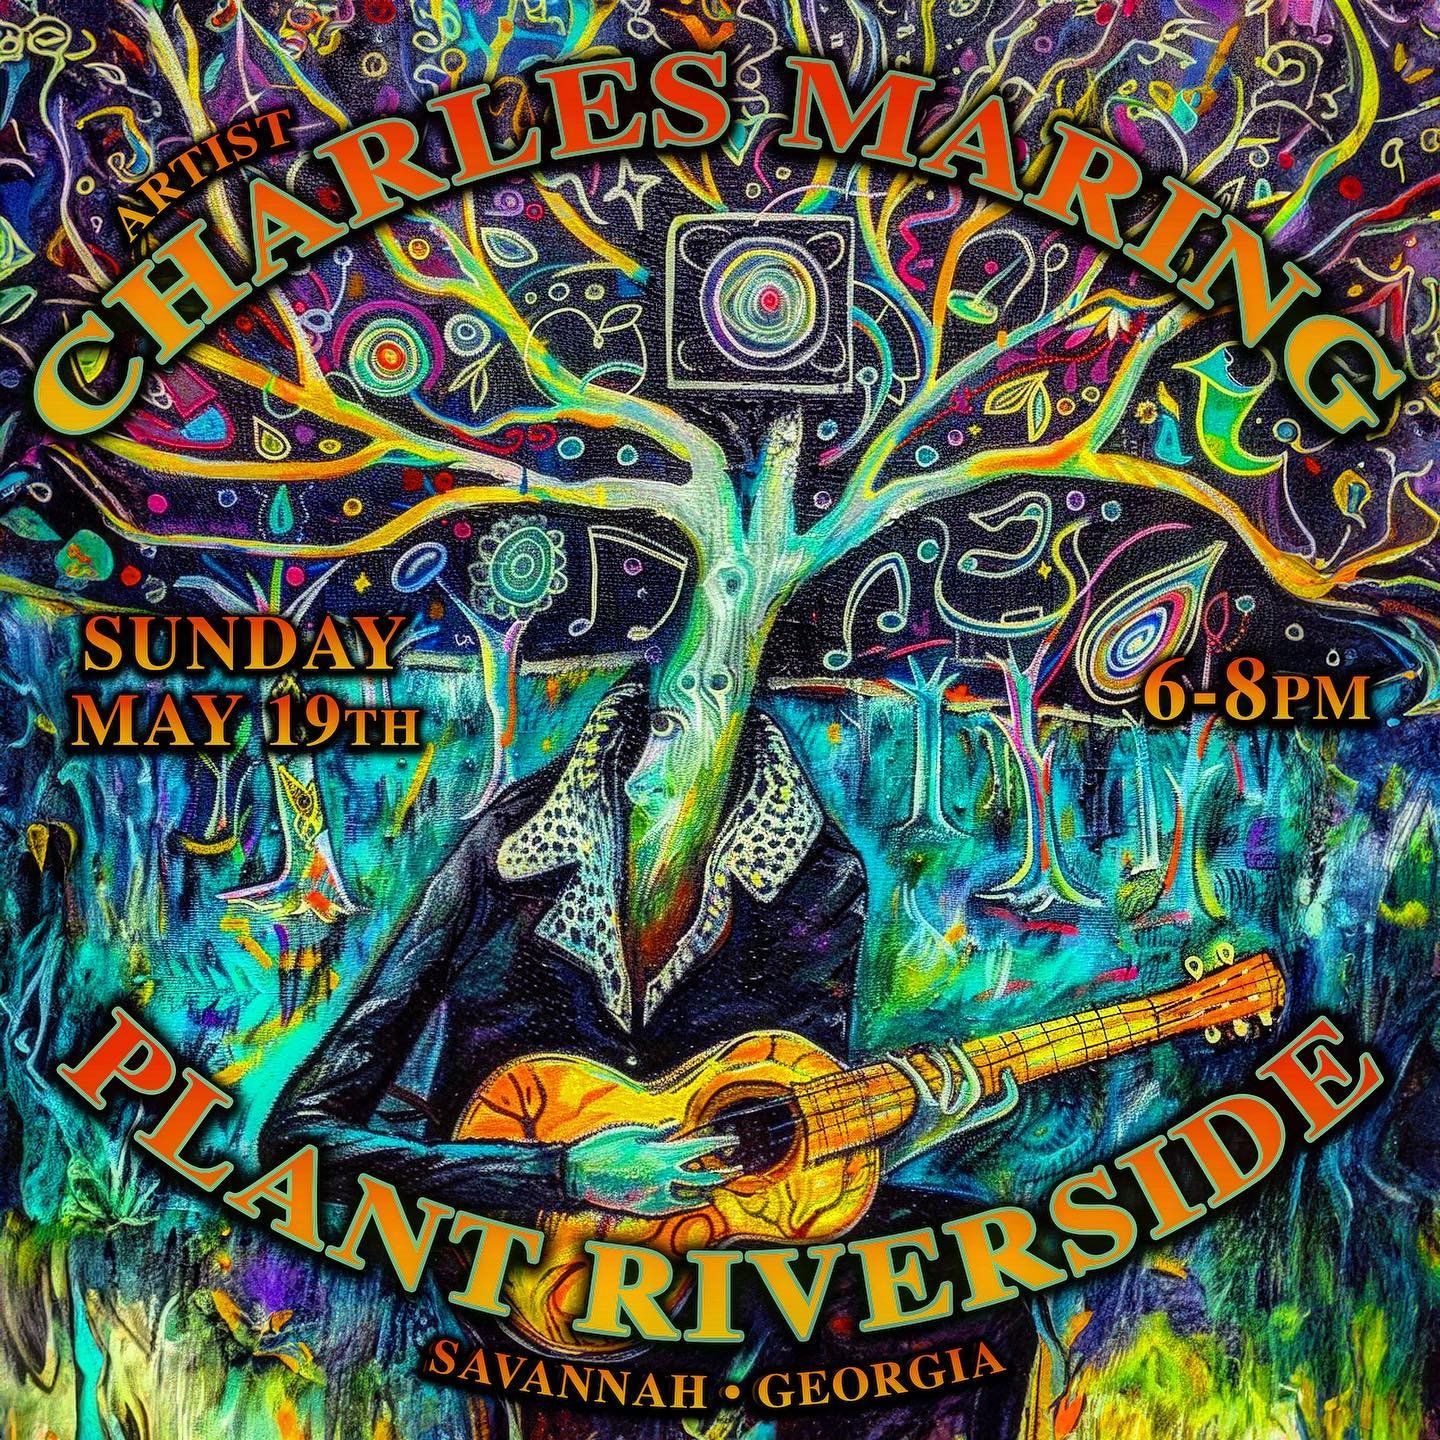 I&rsquo;ll be rock&rsquo;n the riverside @plantriversidedistrict on Sunday from 6-8pm with a solo performance in downtown #savannah #georgia on the Montgomery Park stage. #art 912 #concert #livemusic #songwriter